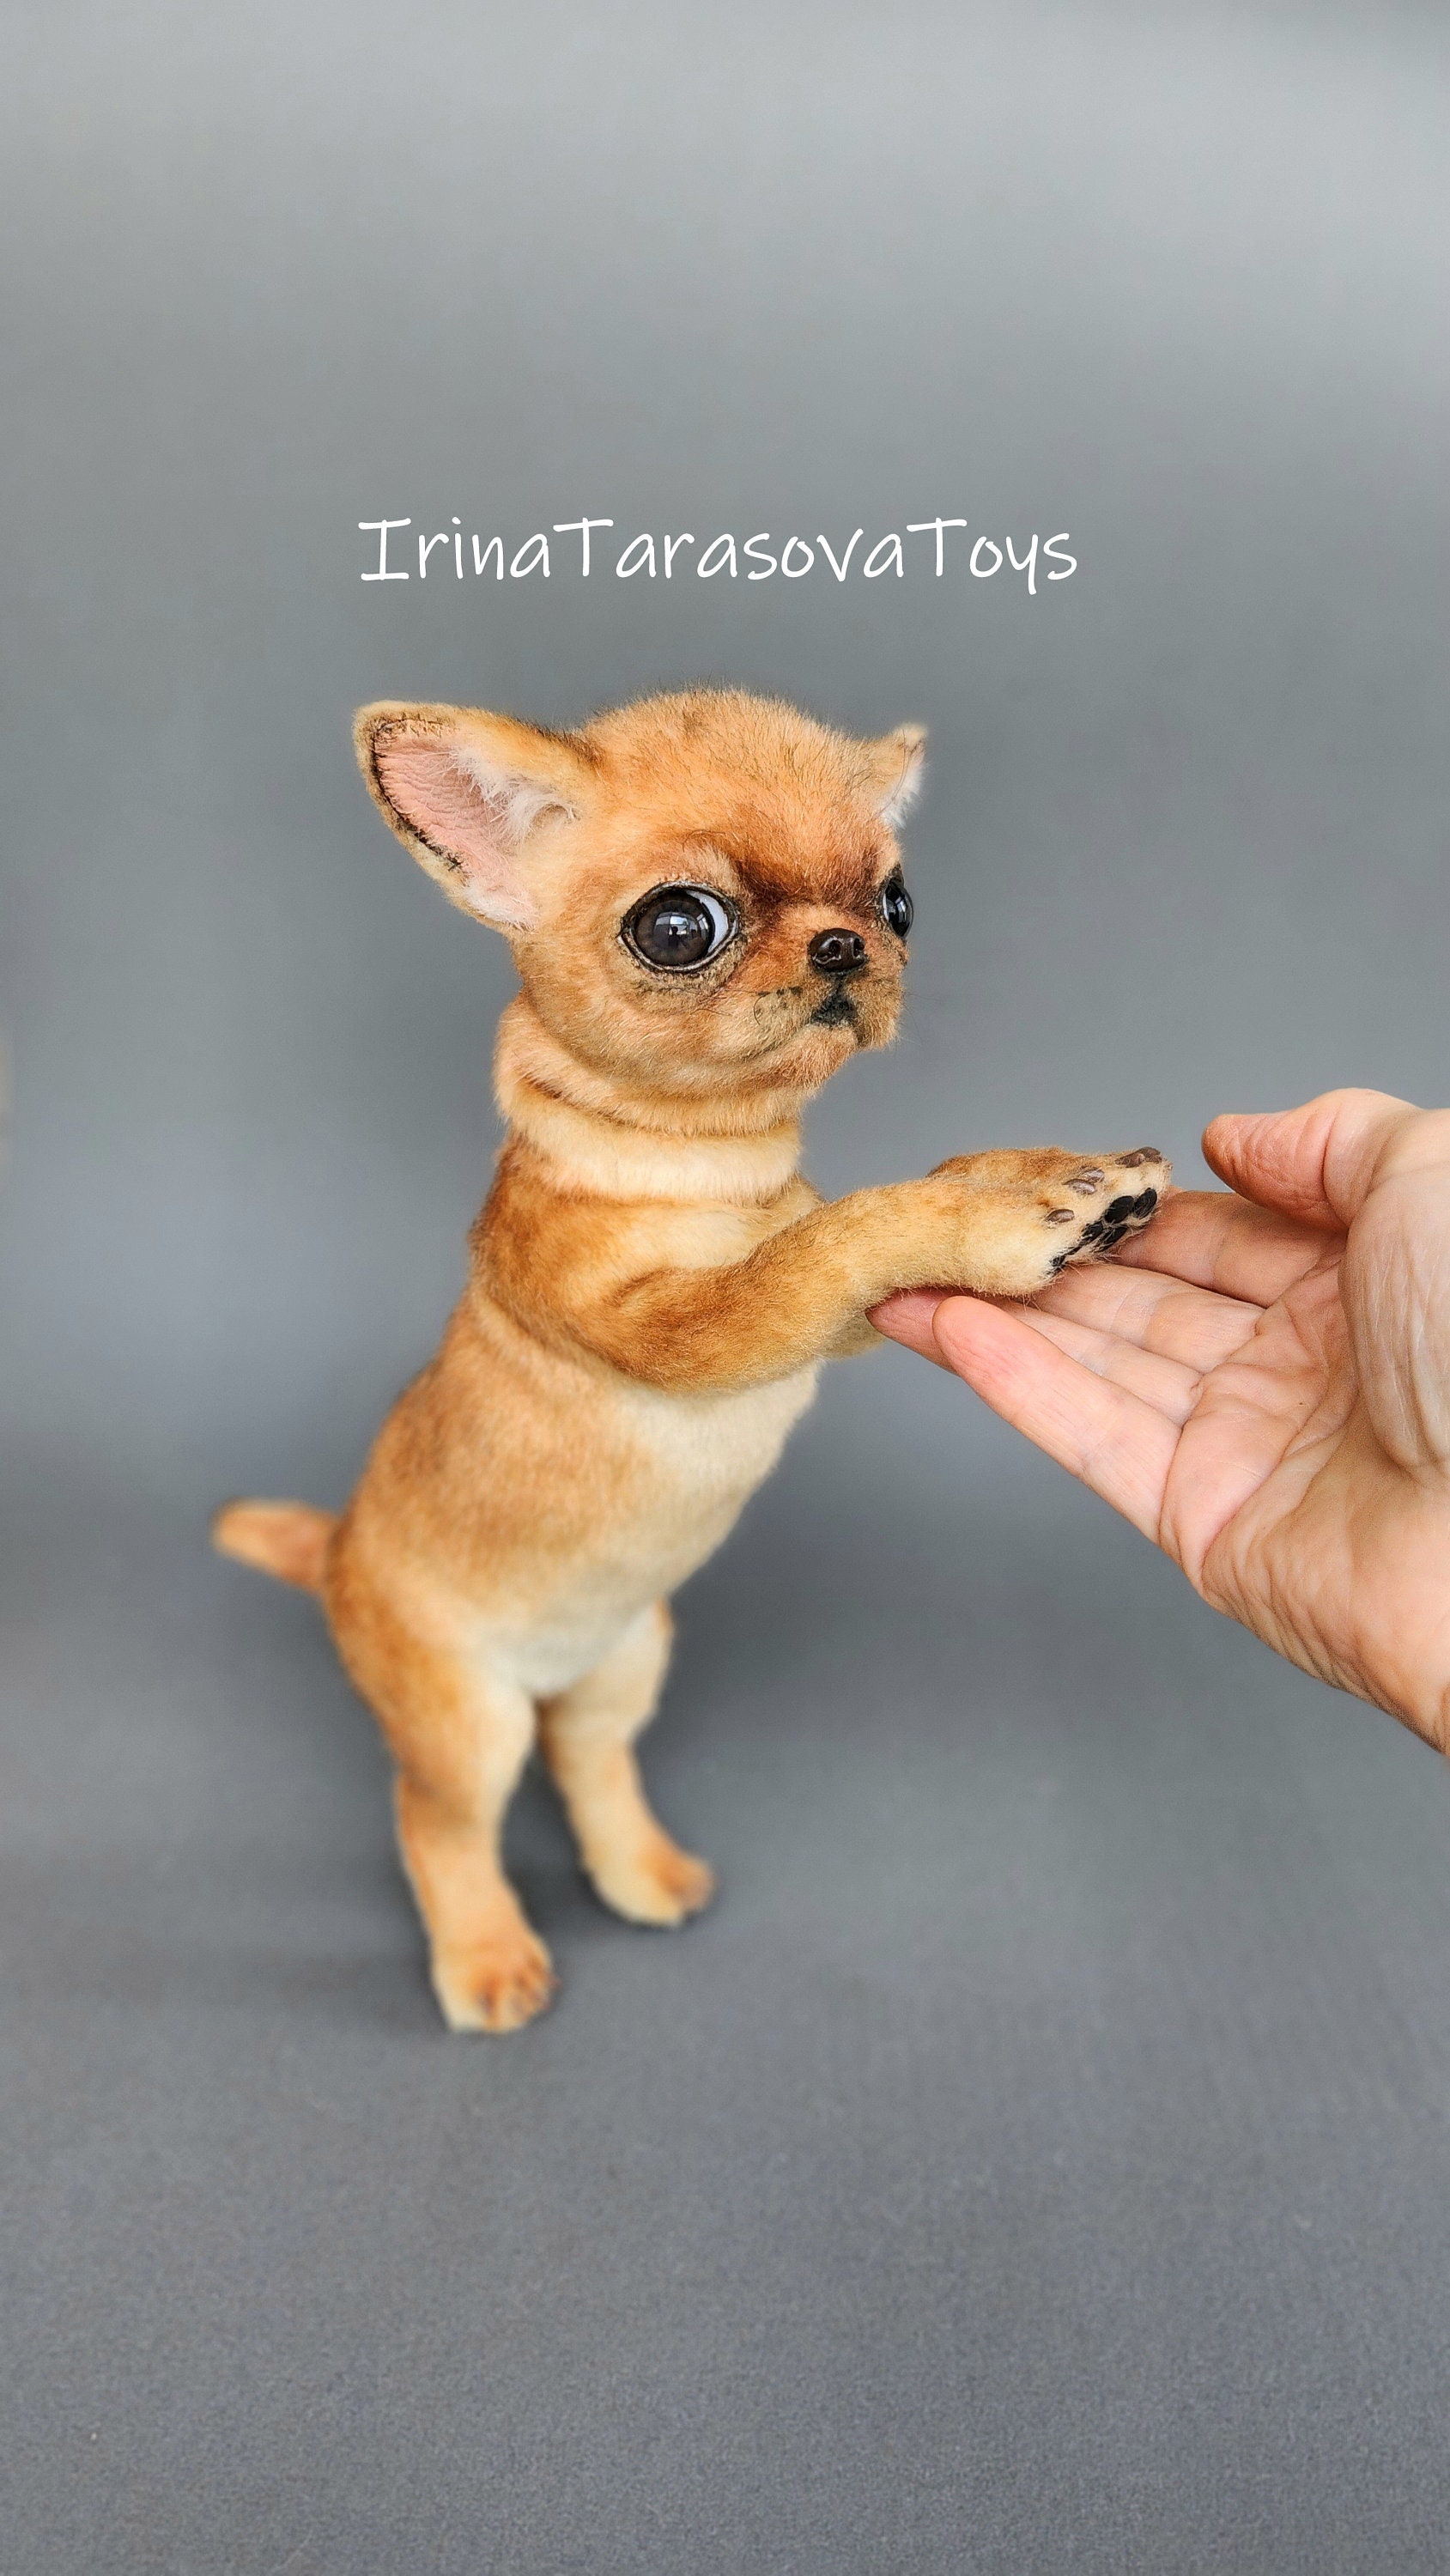 388 realistic chihuahua toys on Tedsby